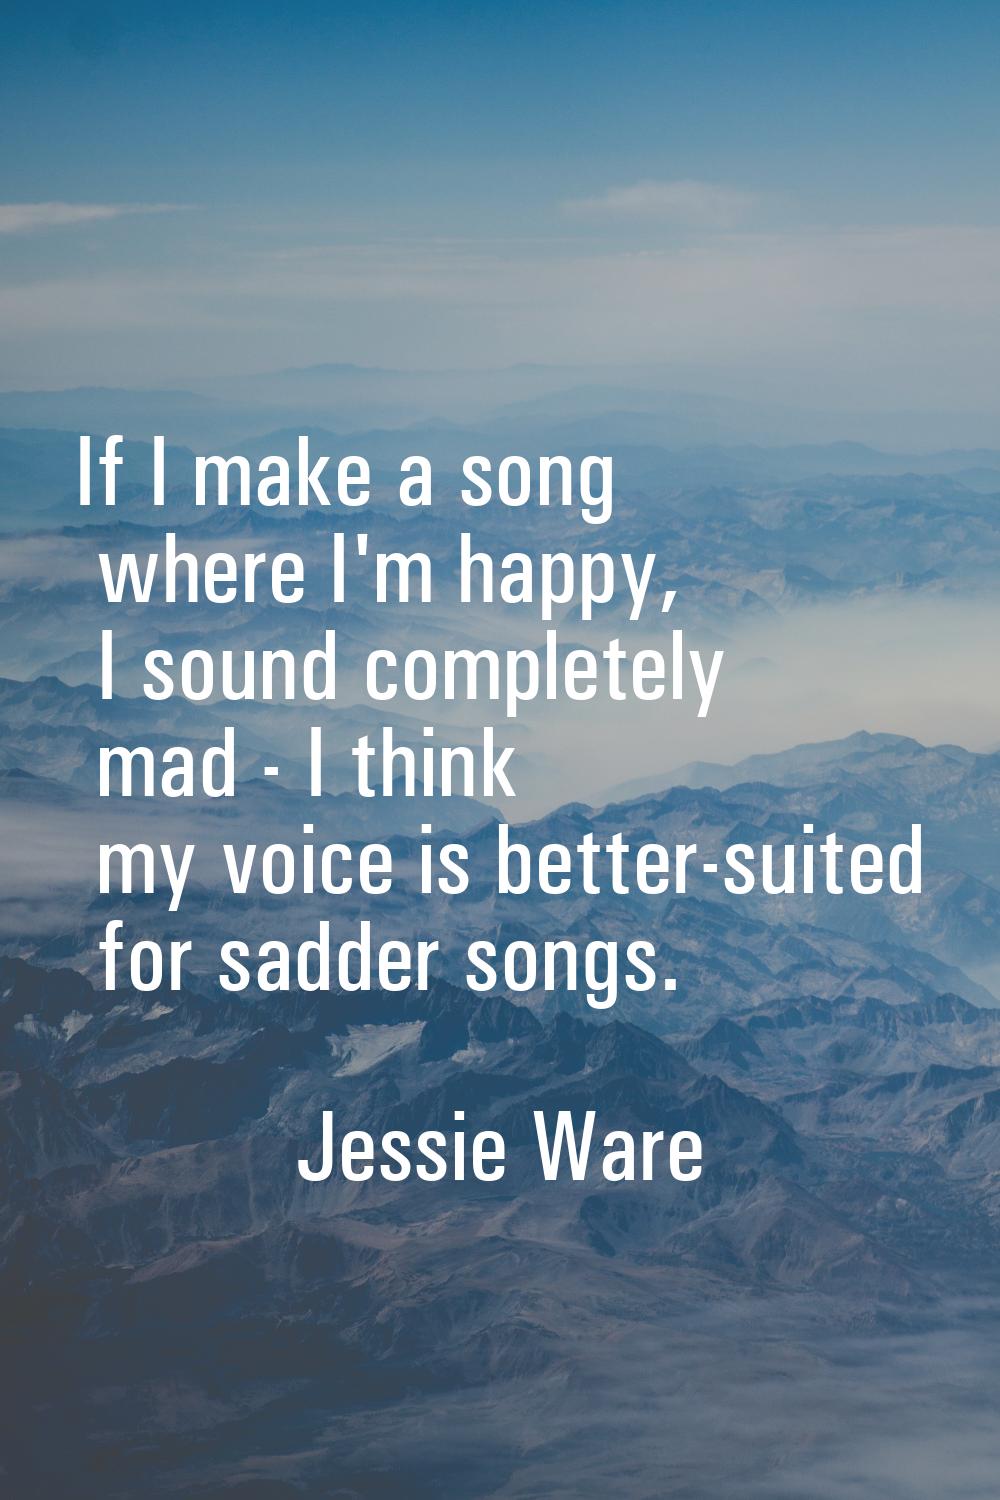 If I make a song where I'm happy, I sound completely mad - I think my voice is better-suited for sa